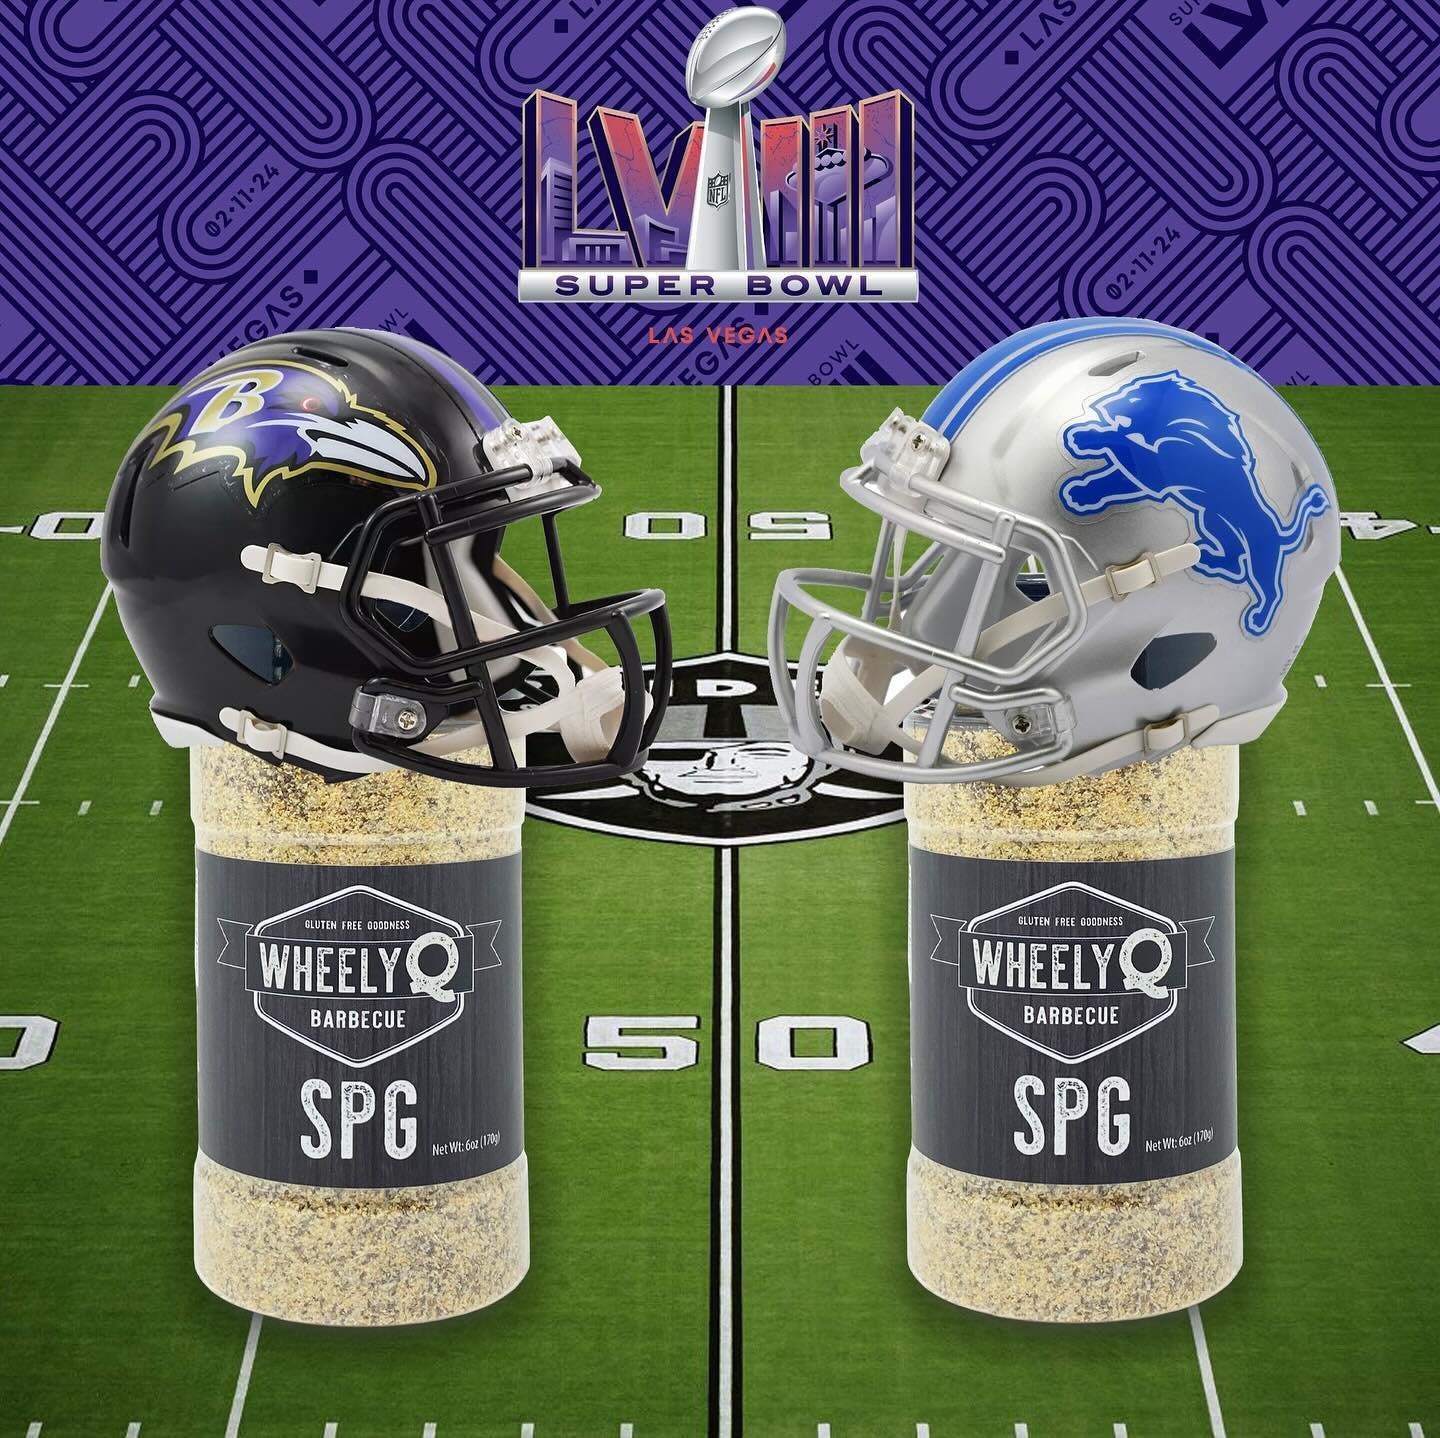 My prediction for the Super Bowl!

Who&rsquo;s with me?

Who do you think is going to the Super Bowl?

Obviously, the SPG is the winner 🤣

&hellip;&hellip;&hellip;&hellip;&hellip;&hellip;&hellip;&hellip;&hellip;&hellip;&hellip;&hellip;&hellip;&helli